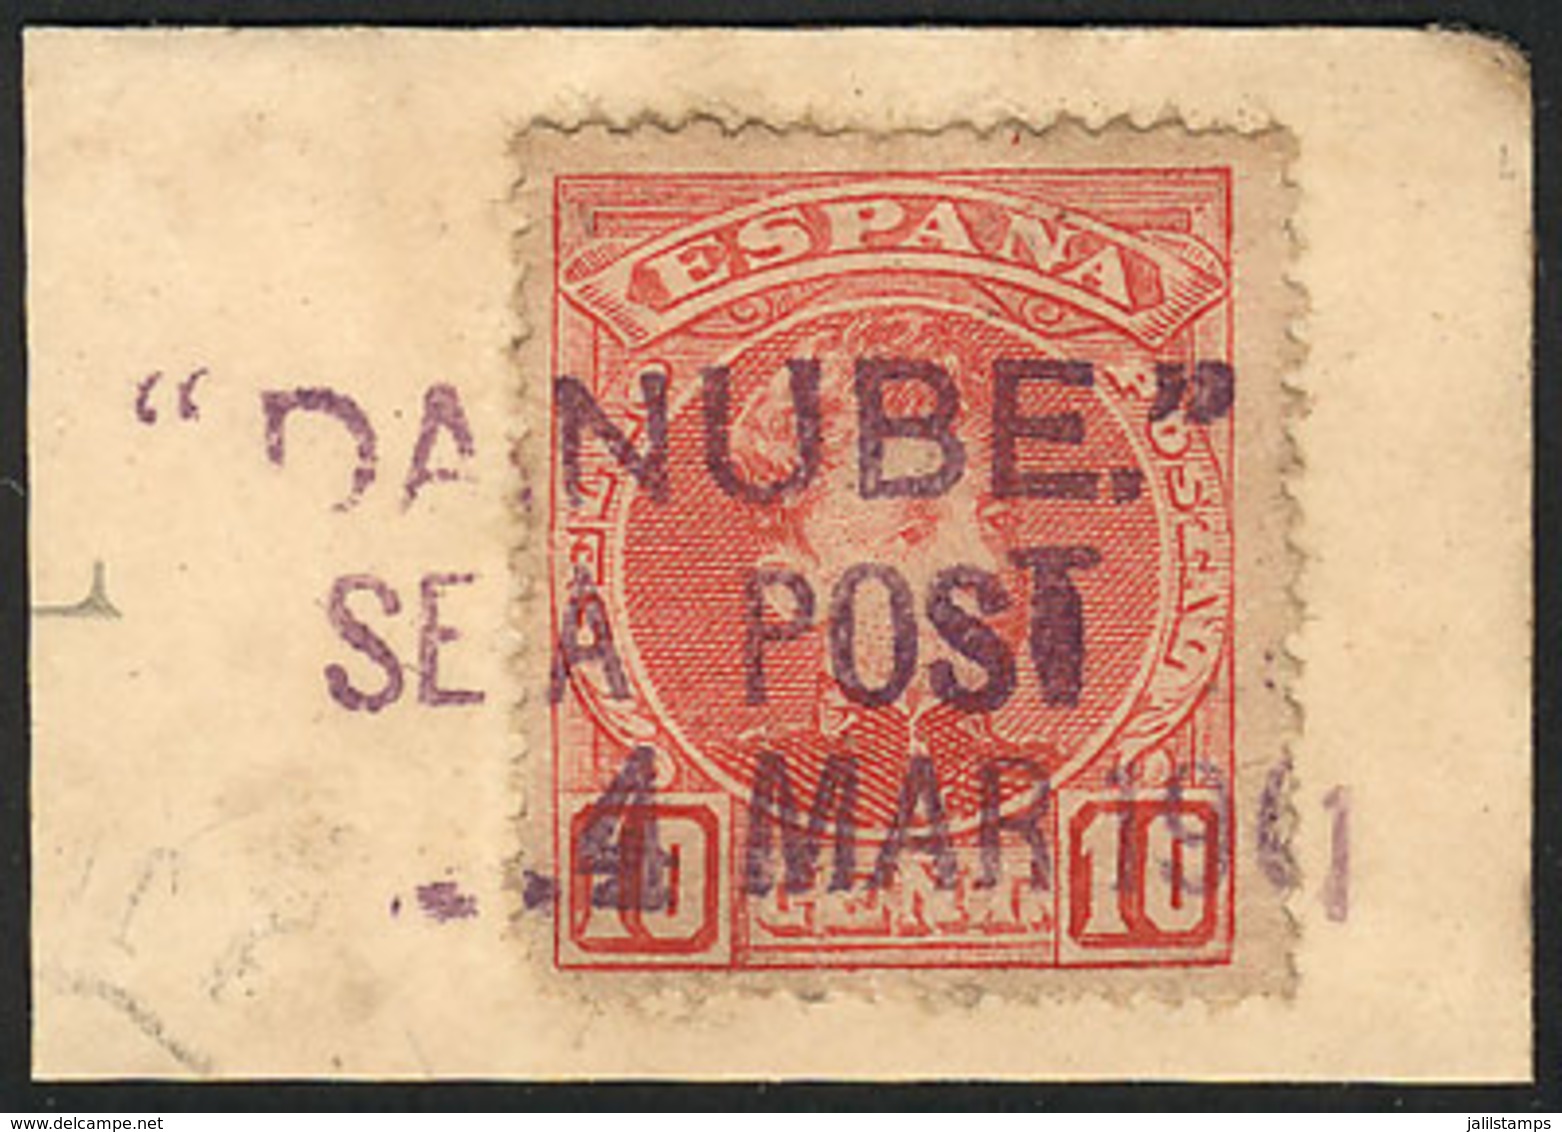 SPAIN: 10c. Stamp On A Fragment Of Cover, With Rare Postmark: DANUBE" - SEA POST - 4 MAR 1901, Interesting!" - Sonstige & Ohne Zuordnung